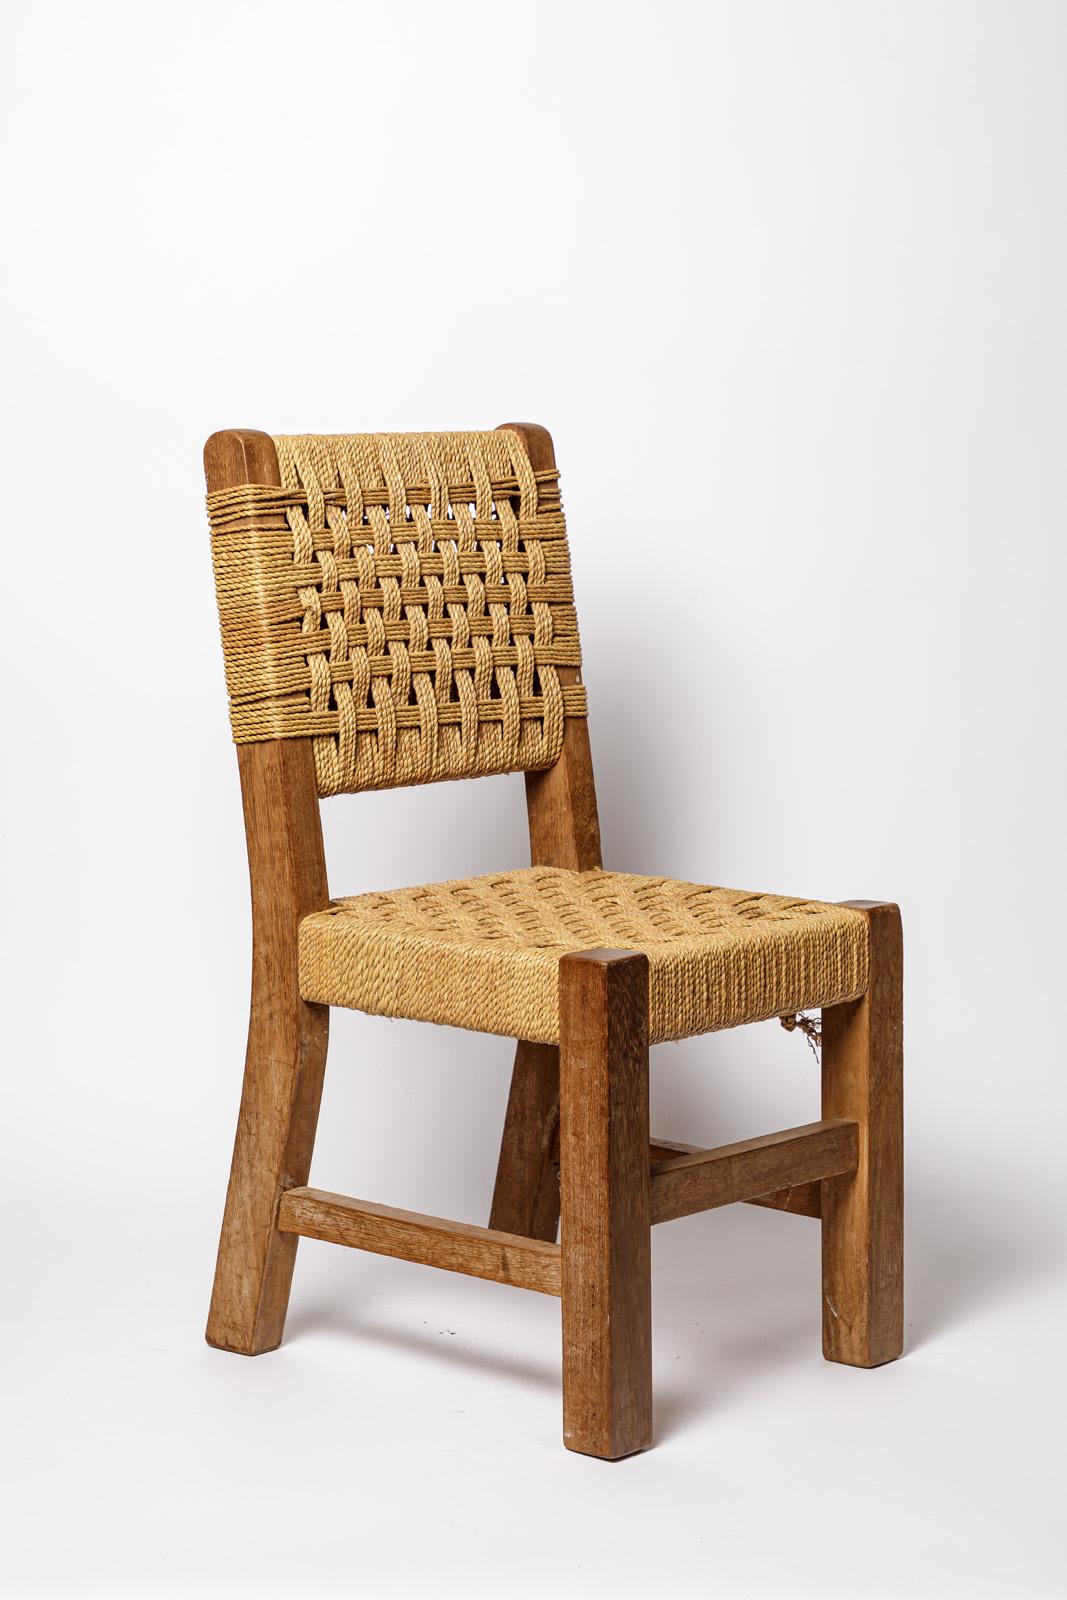 French 20th century children wood and cord design chair style of AUdoux Minnet design For Sale